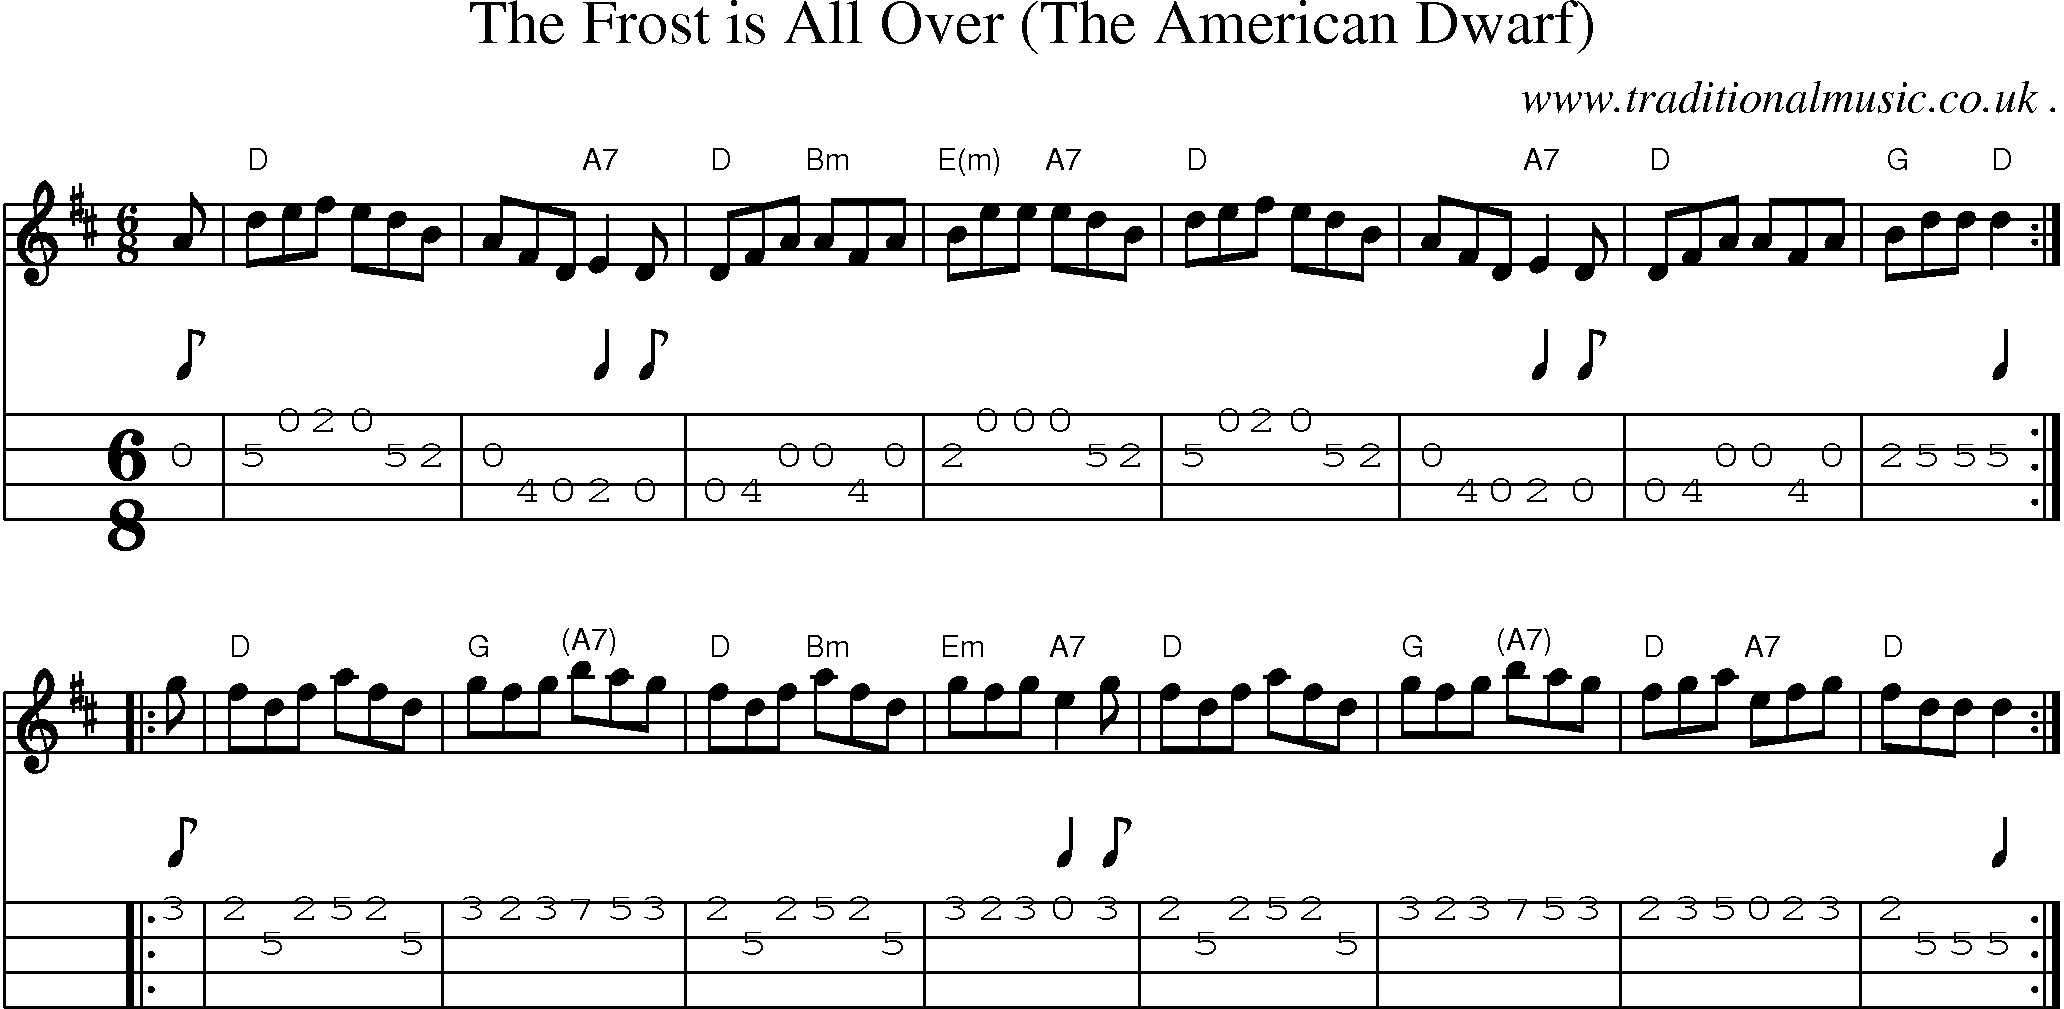 Sheet-music  score, Chords and Mandolin Tabs for The Frost Is All Over The American Dwarf